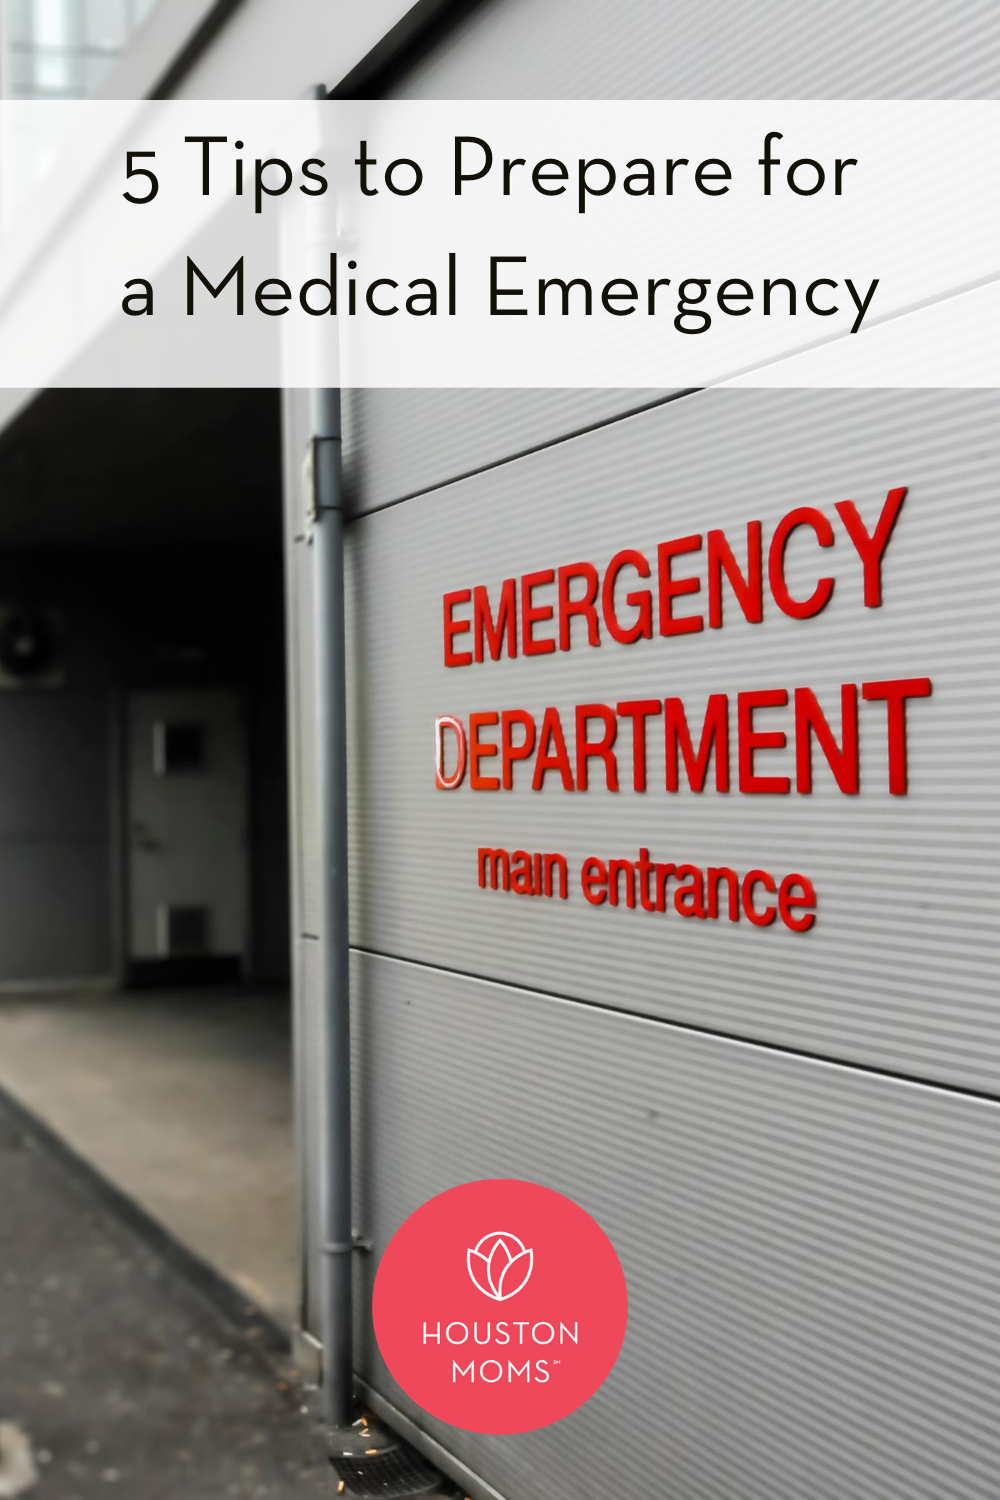 Houston Moms "5 Tips to Prepare for a Medical Emergency" #houstonmoms #houstonmomsblog #momsaroundhouston